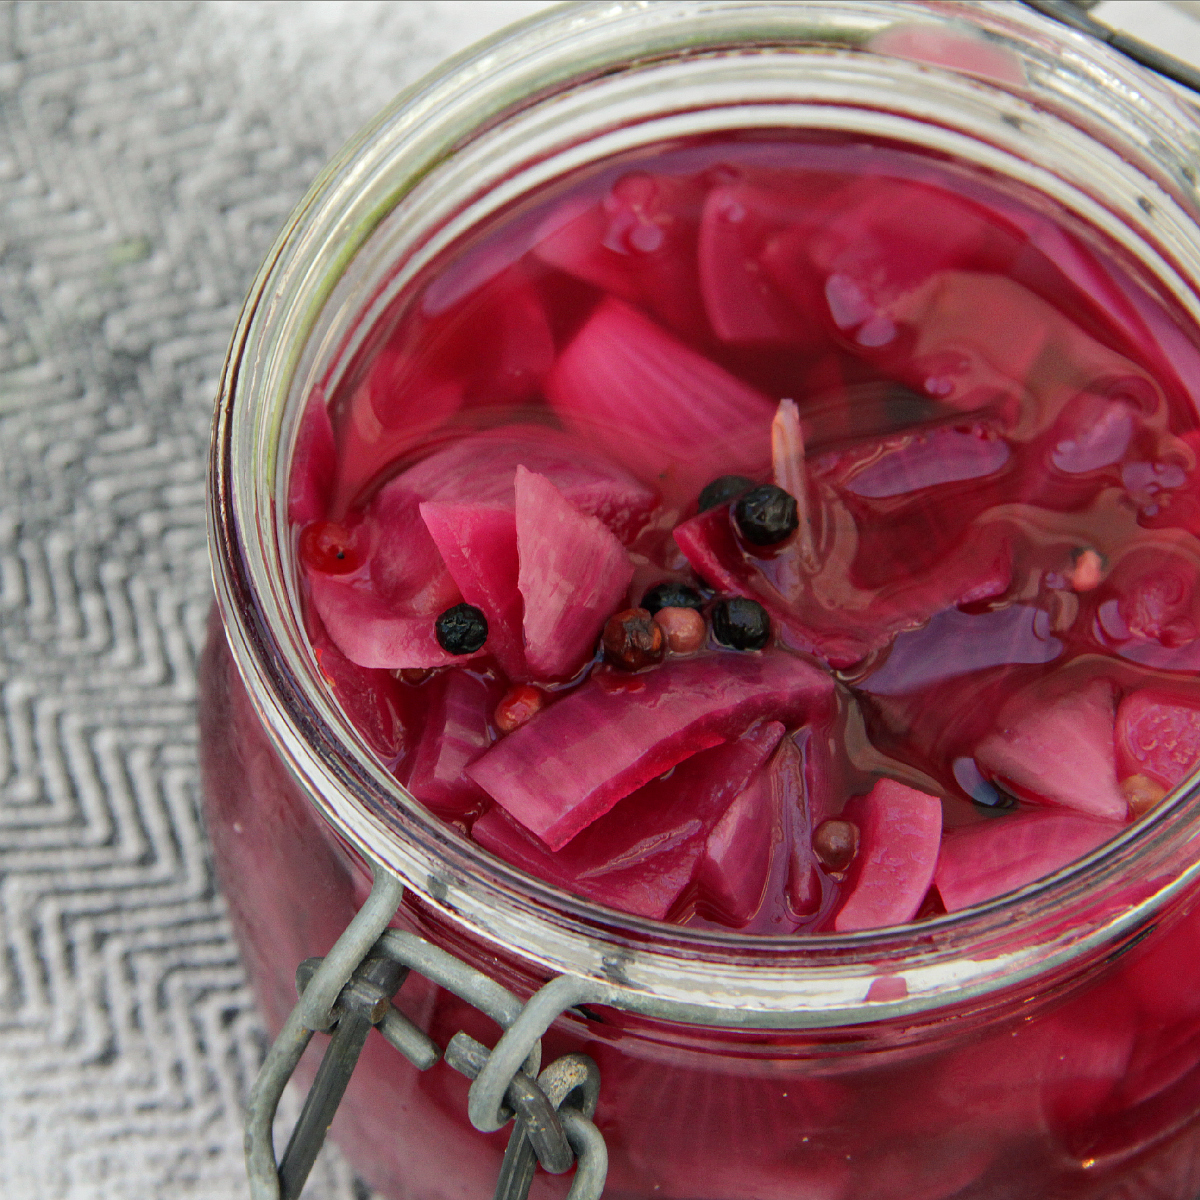 Pickled Red Onions - The Vegan Eskimo